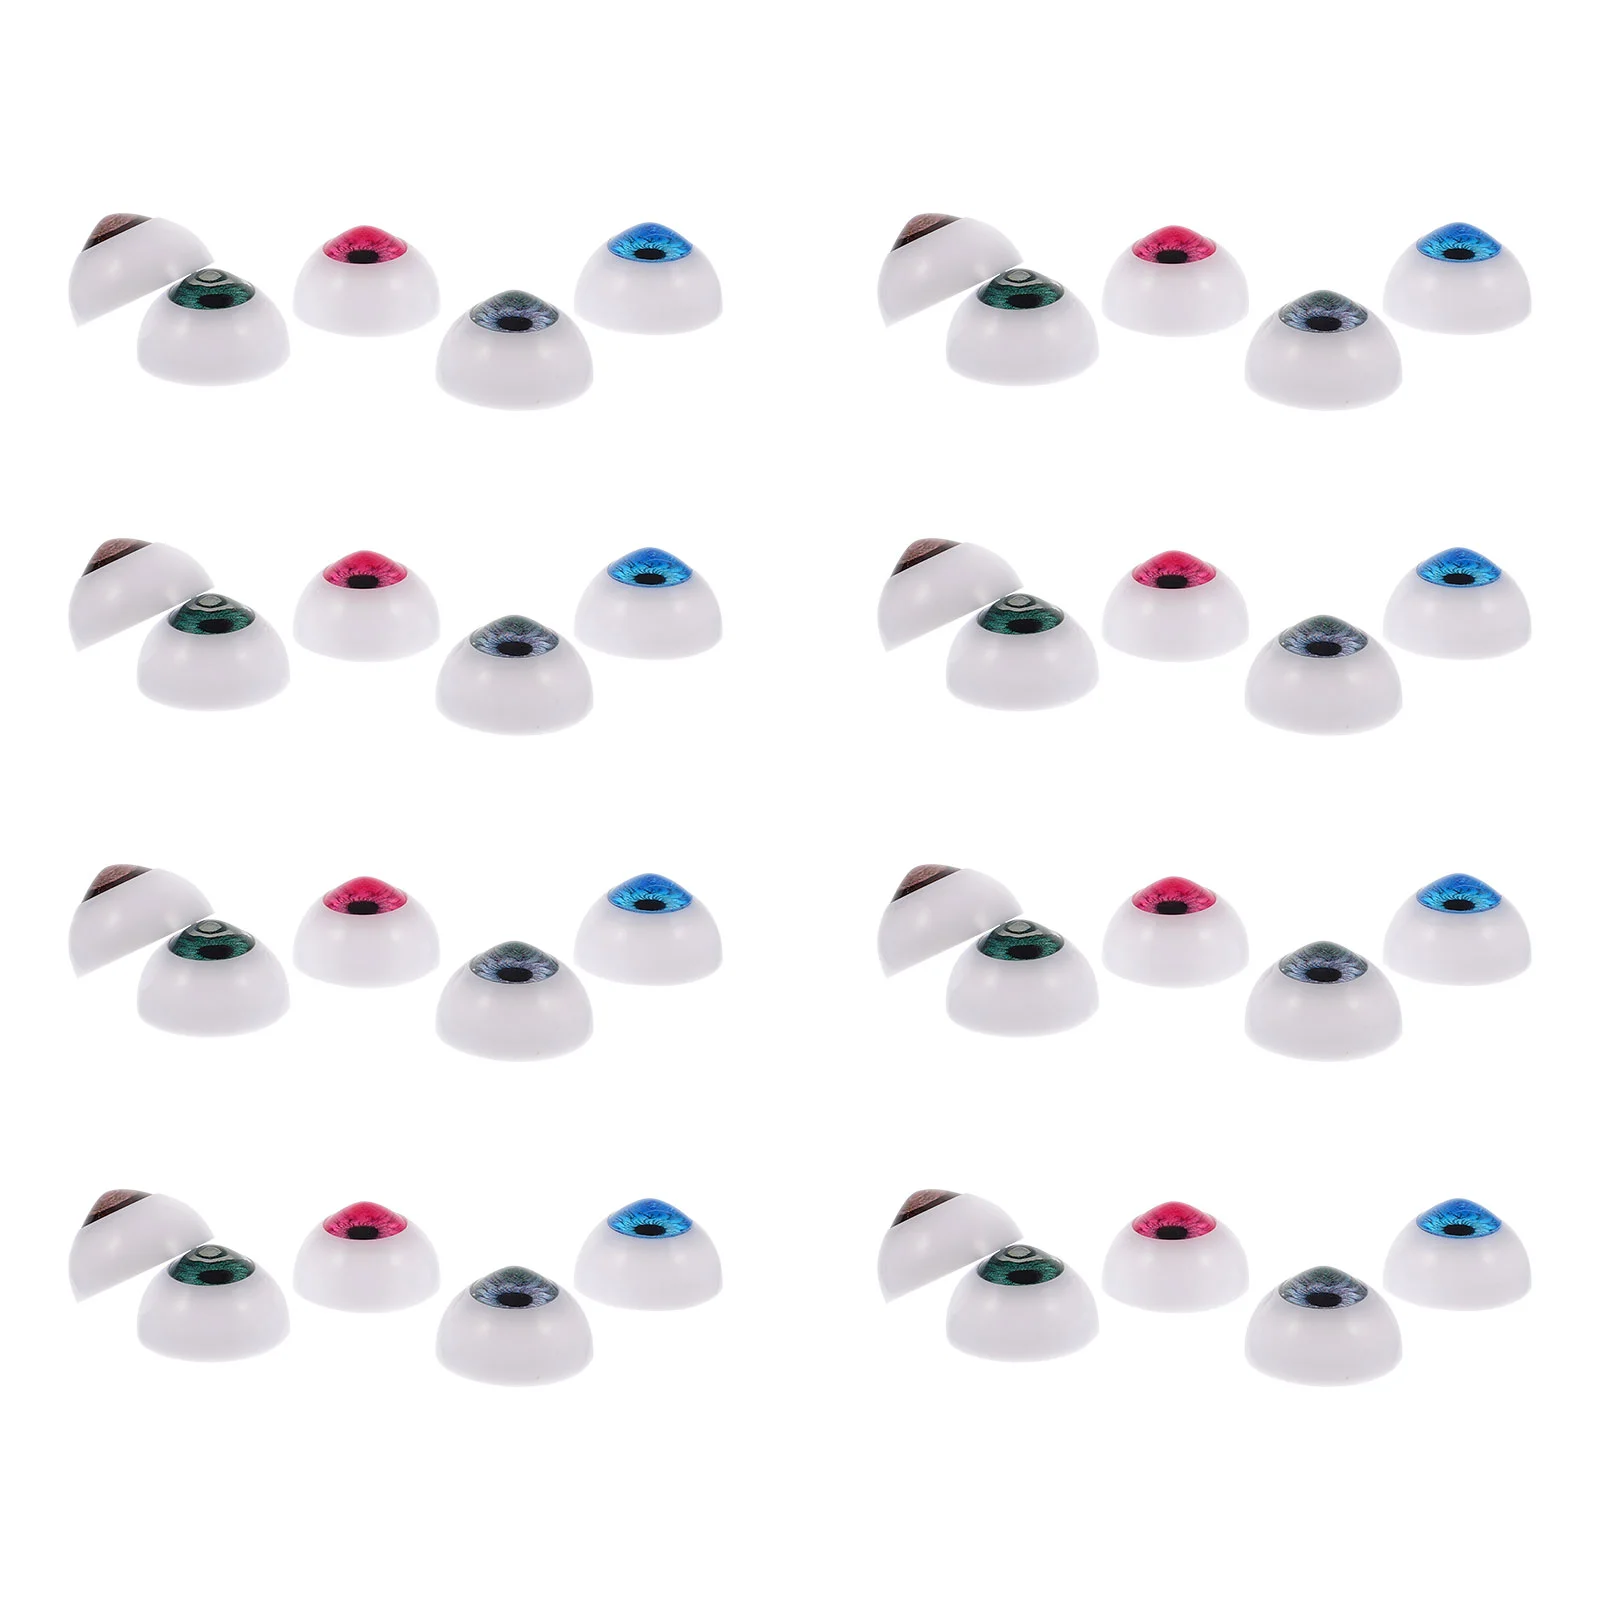 50 Pcs Decor Artificial Eyes DIY Material Halloween Props Realistic Acrylic Eyeball Eyeballs Craft Supplies Crafts professional painting gouache 12 18 24 36 colors acrylic paint washable set hand painted mural craft paint set for art supplies